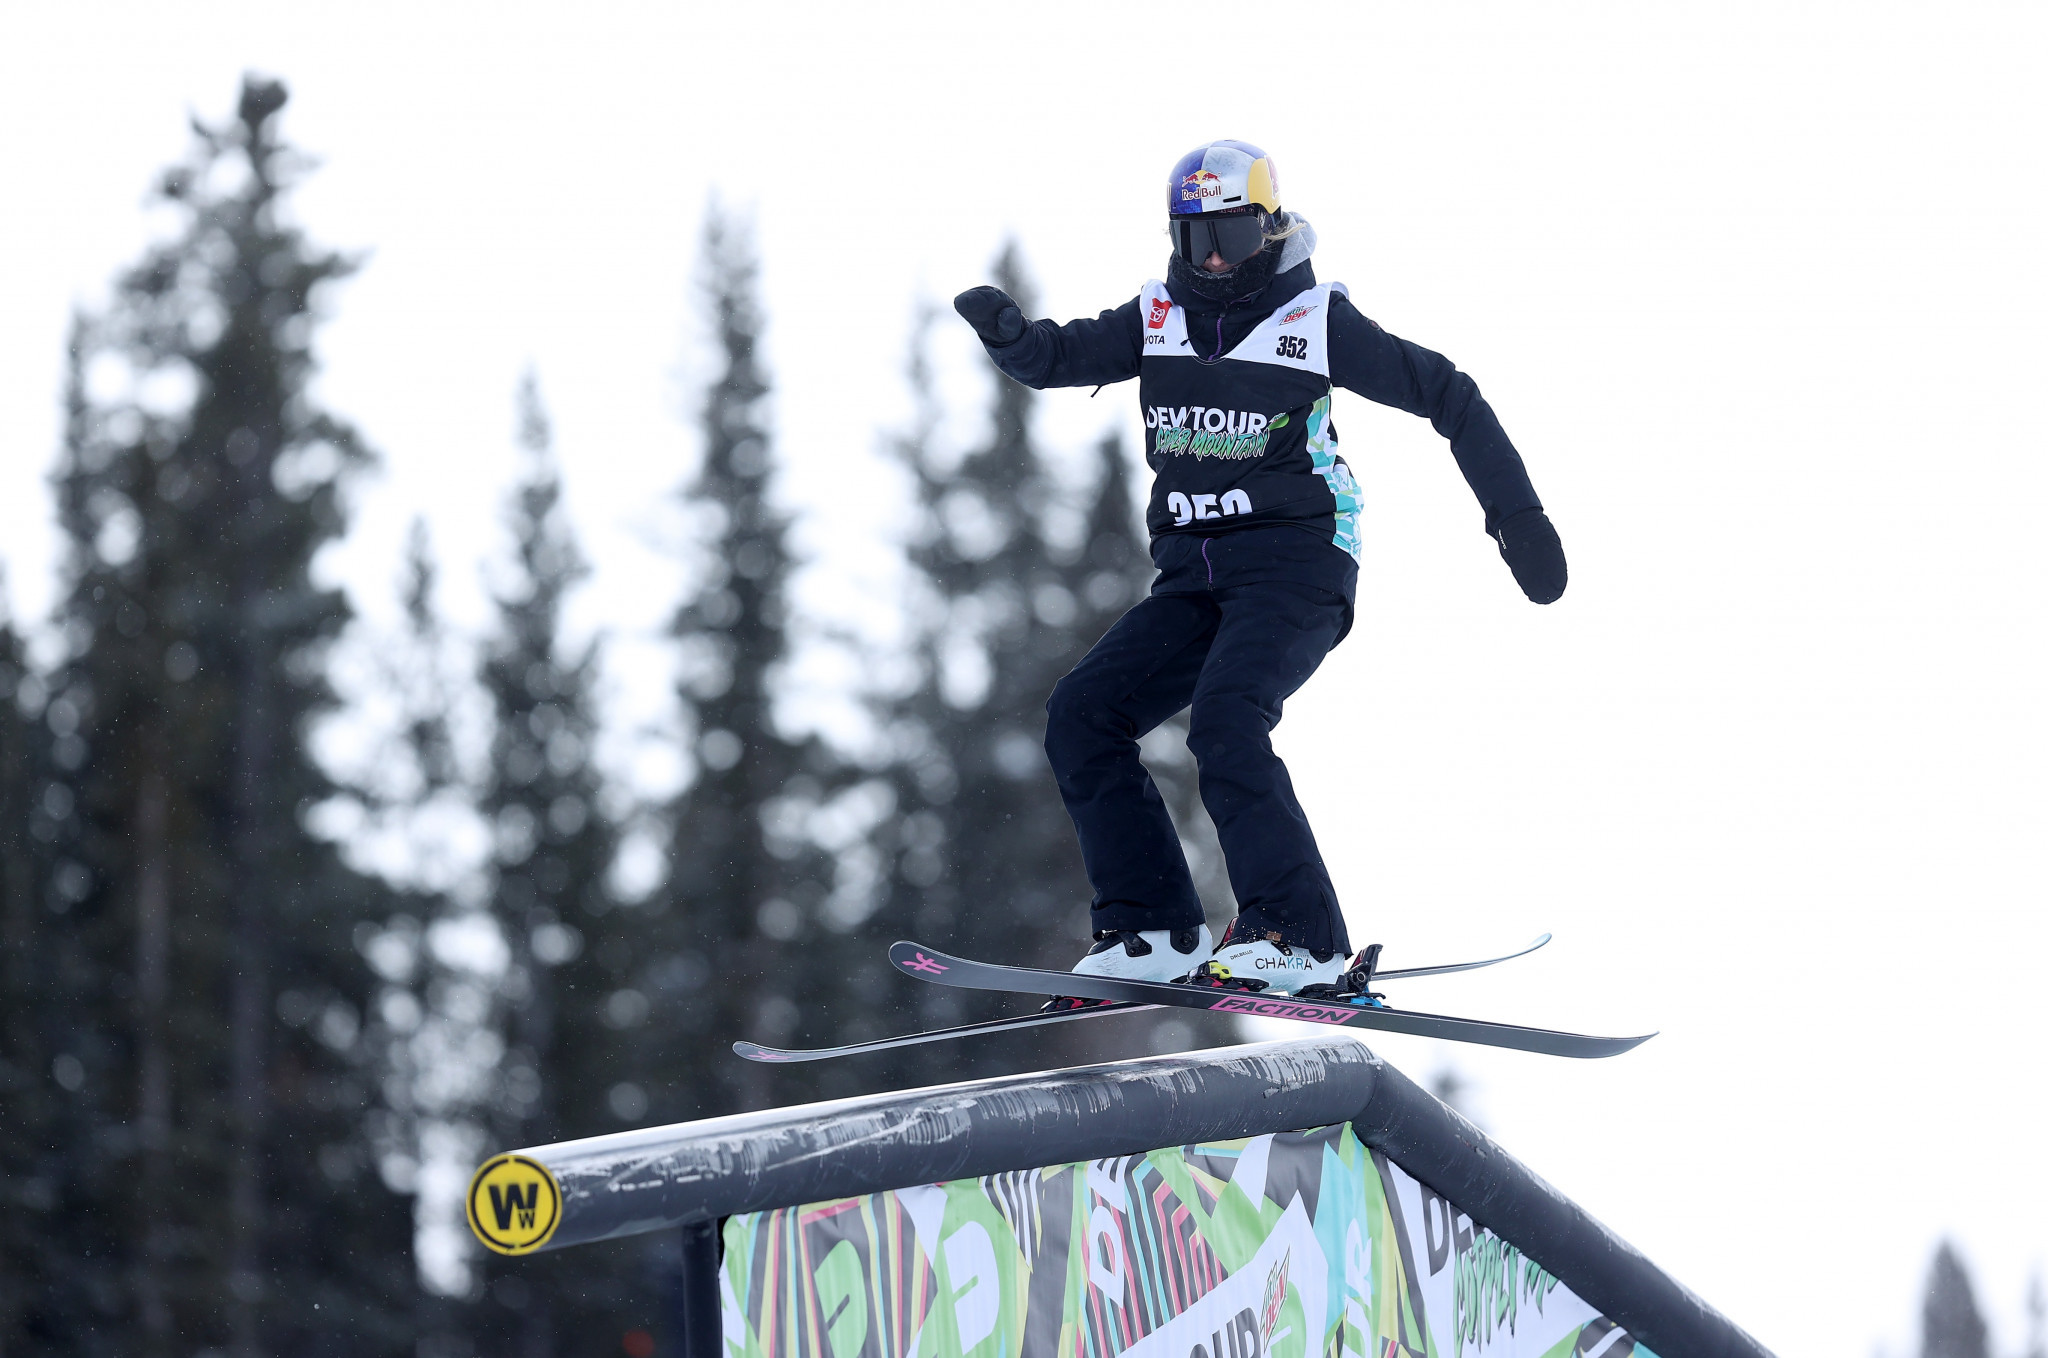 Freestyle skier Kelly Sildaru is among 26 athletes that are set to represent Estonia at Beijing 2022 ©Getty Images